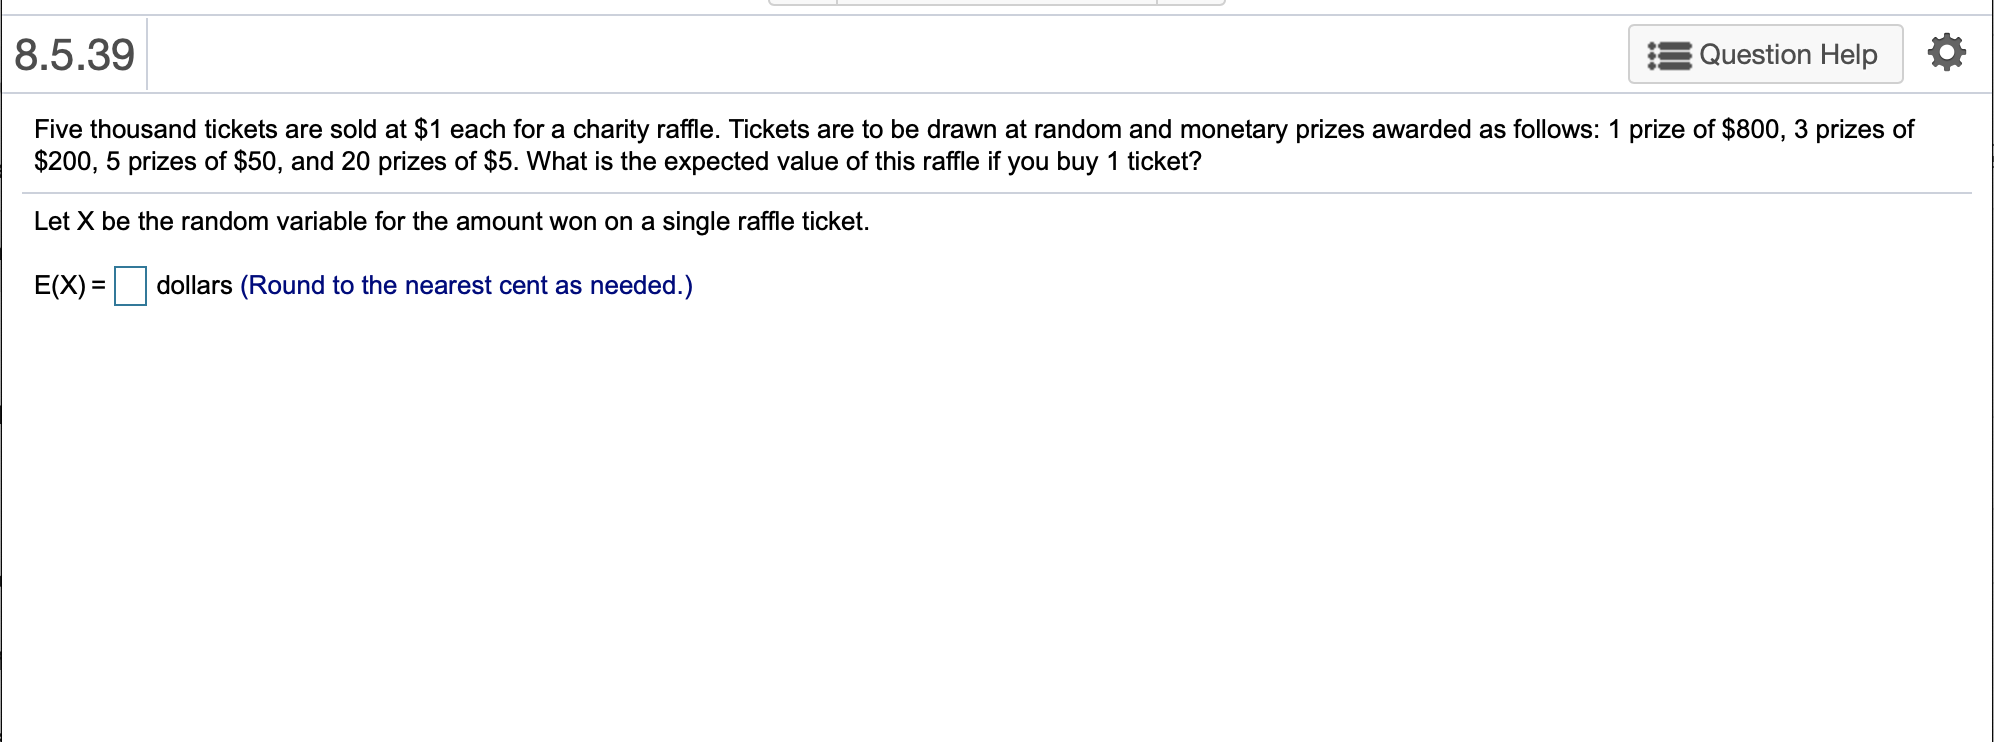 8.5.39
Question Help
Five thousand tickets are sold at $1 each for a charity raffle. Tickets are to be drawn at random and monetary prizes awarded as follows: 1 prize of $800, 3 prizes of
$200, 5 prizes of $50, and 20 prizes of $5. What is the expected value of this raffle if you buy 1 ticket?
Let X be the random variable for the amount won on a single raffle ticket.
dollars (Round to the nearest cent as needed.)
E(X)
